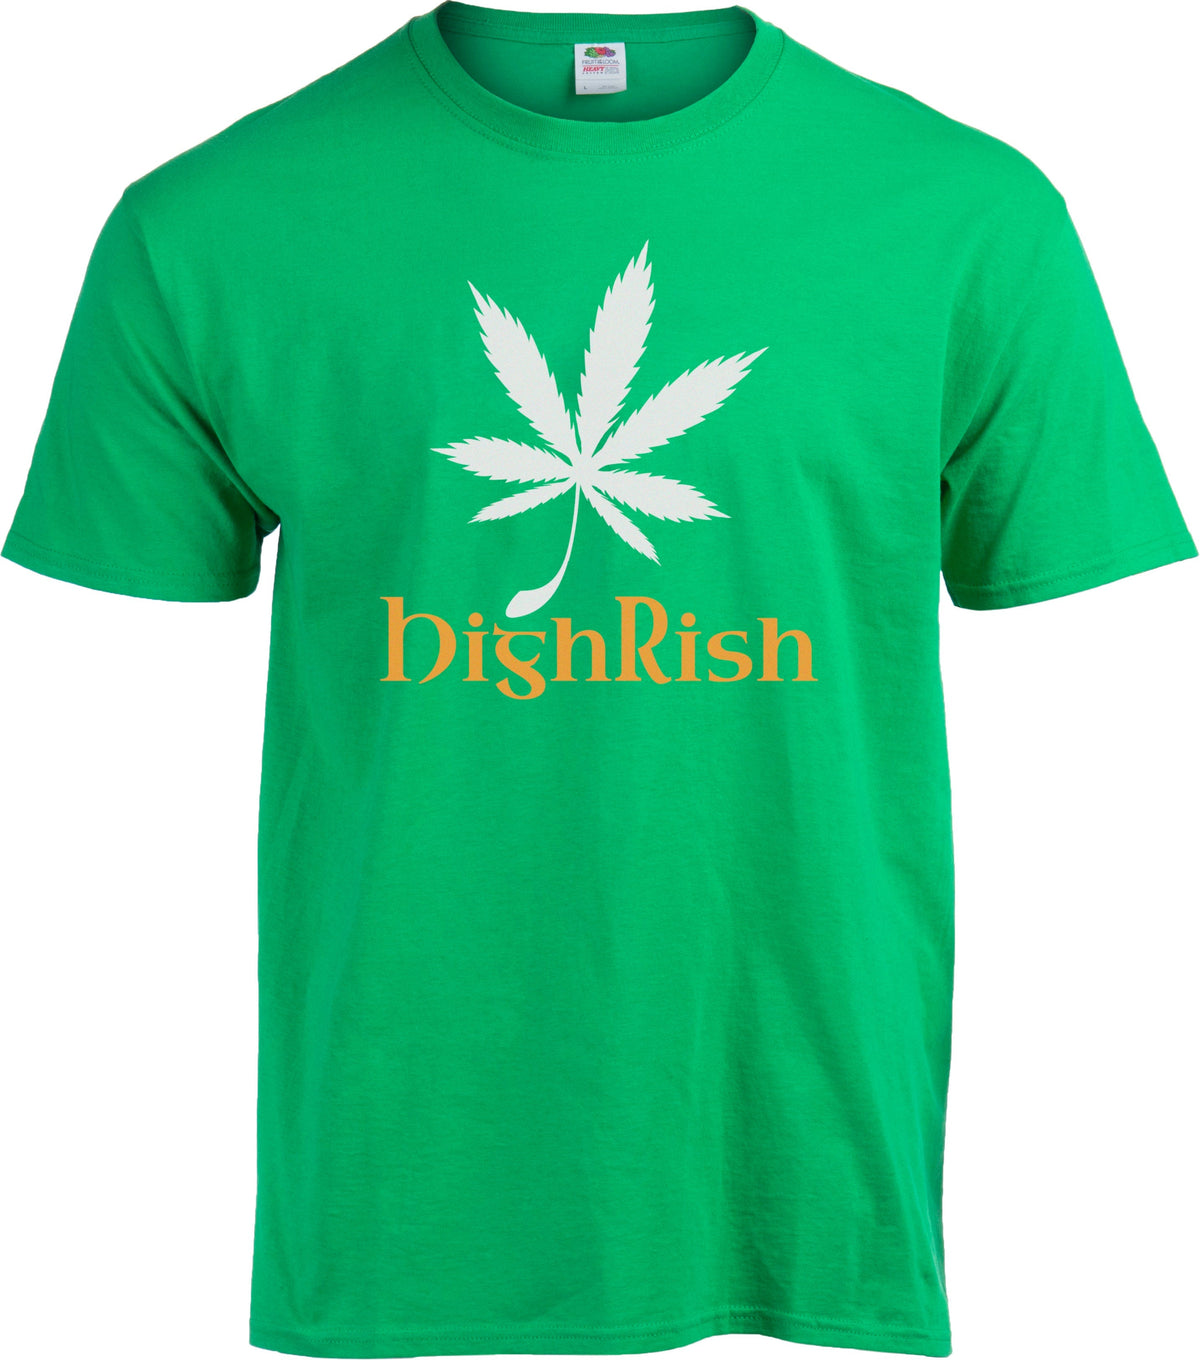 HighRish - St. Patrick's Day Sticky Green Weed Funny Stoner Party T-shirt - Women's